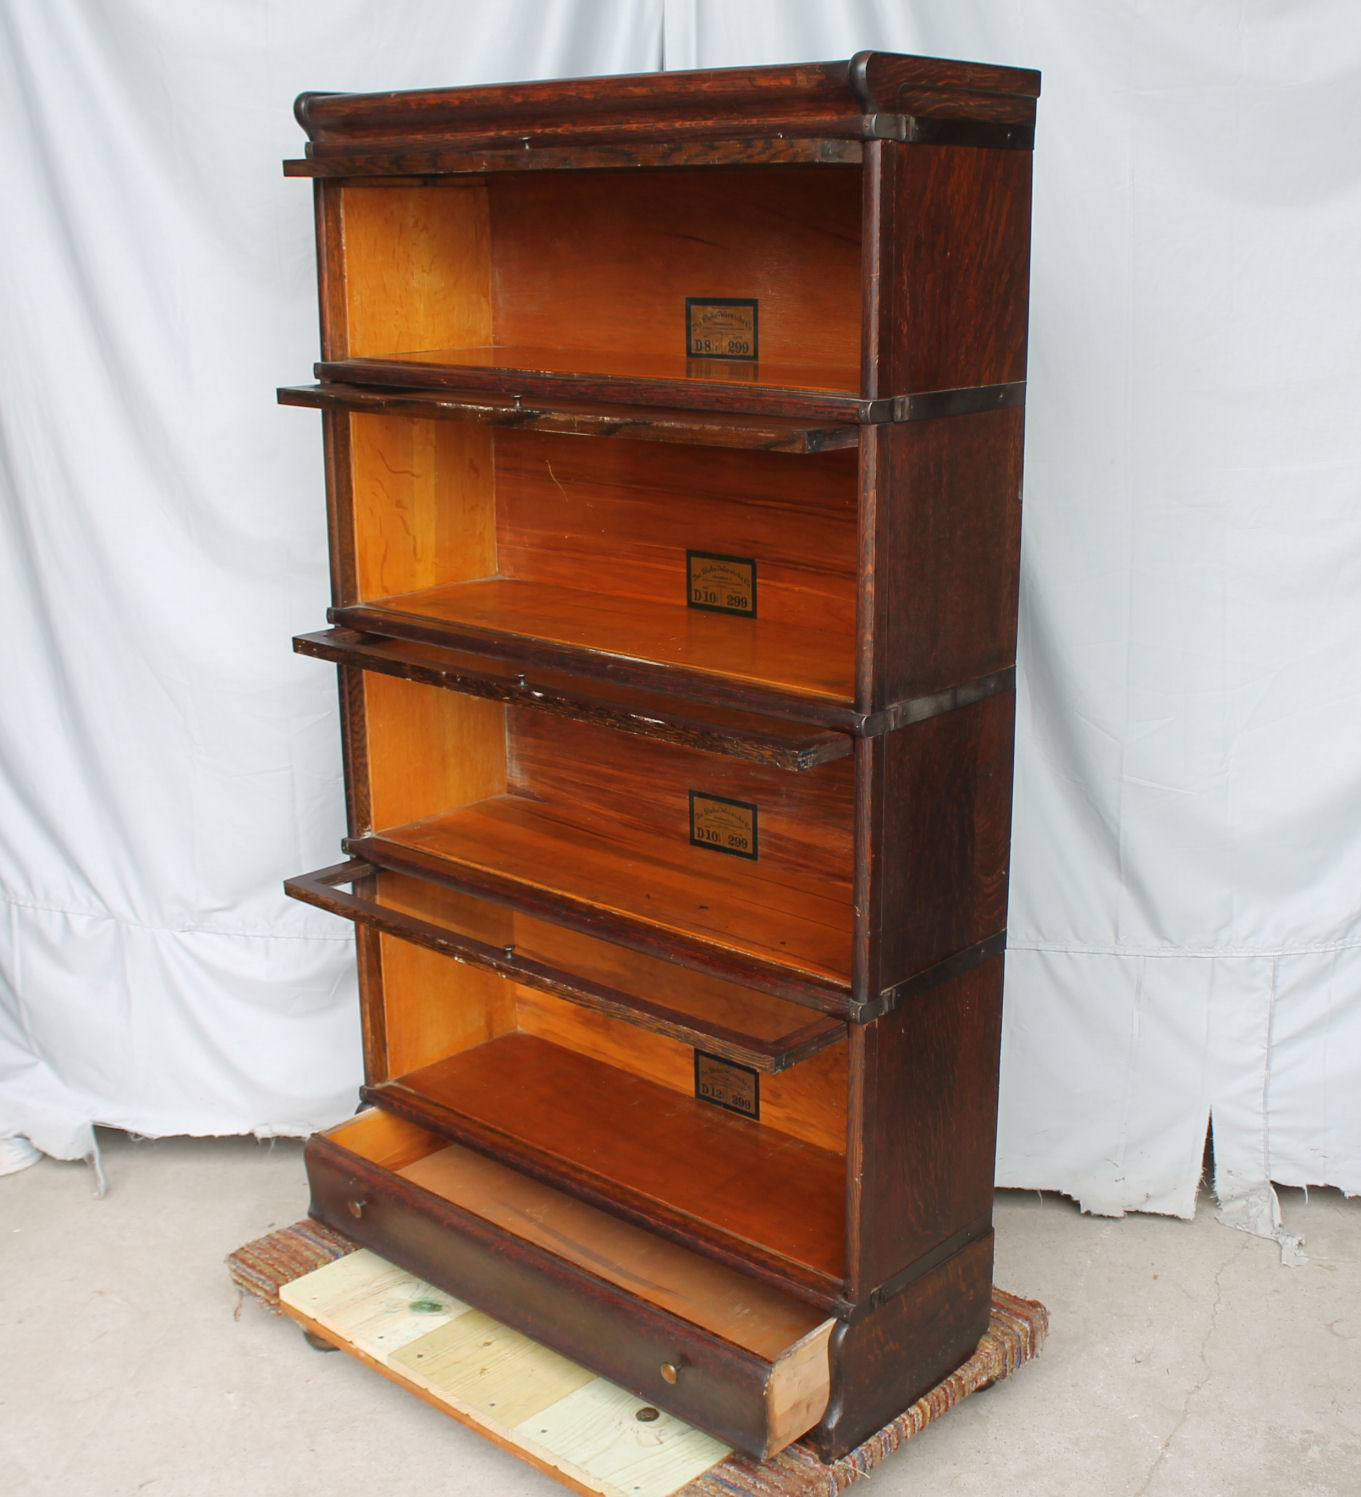 Bargain John's Antiques | Antique Oak Bookcase 4 sections with drawer